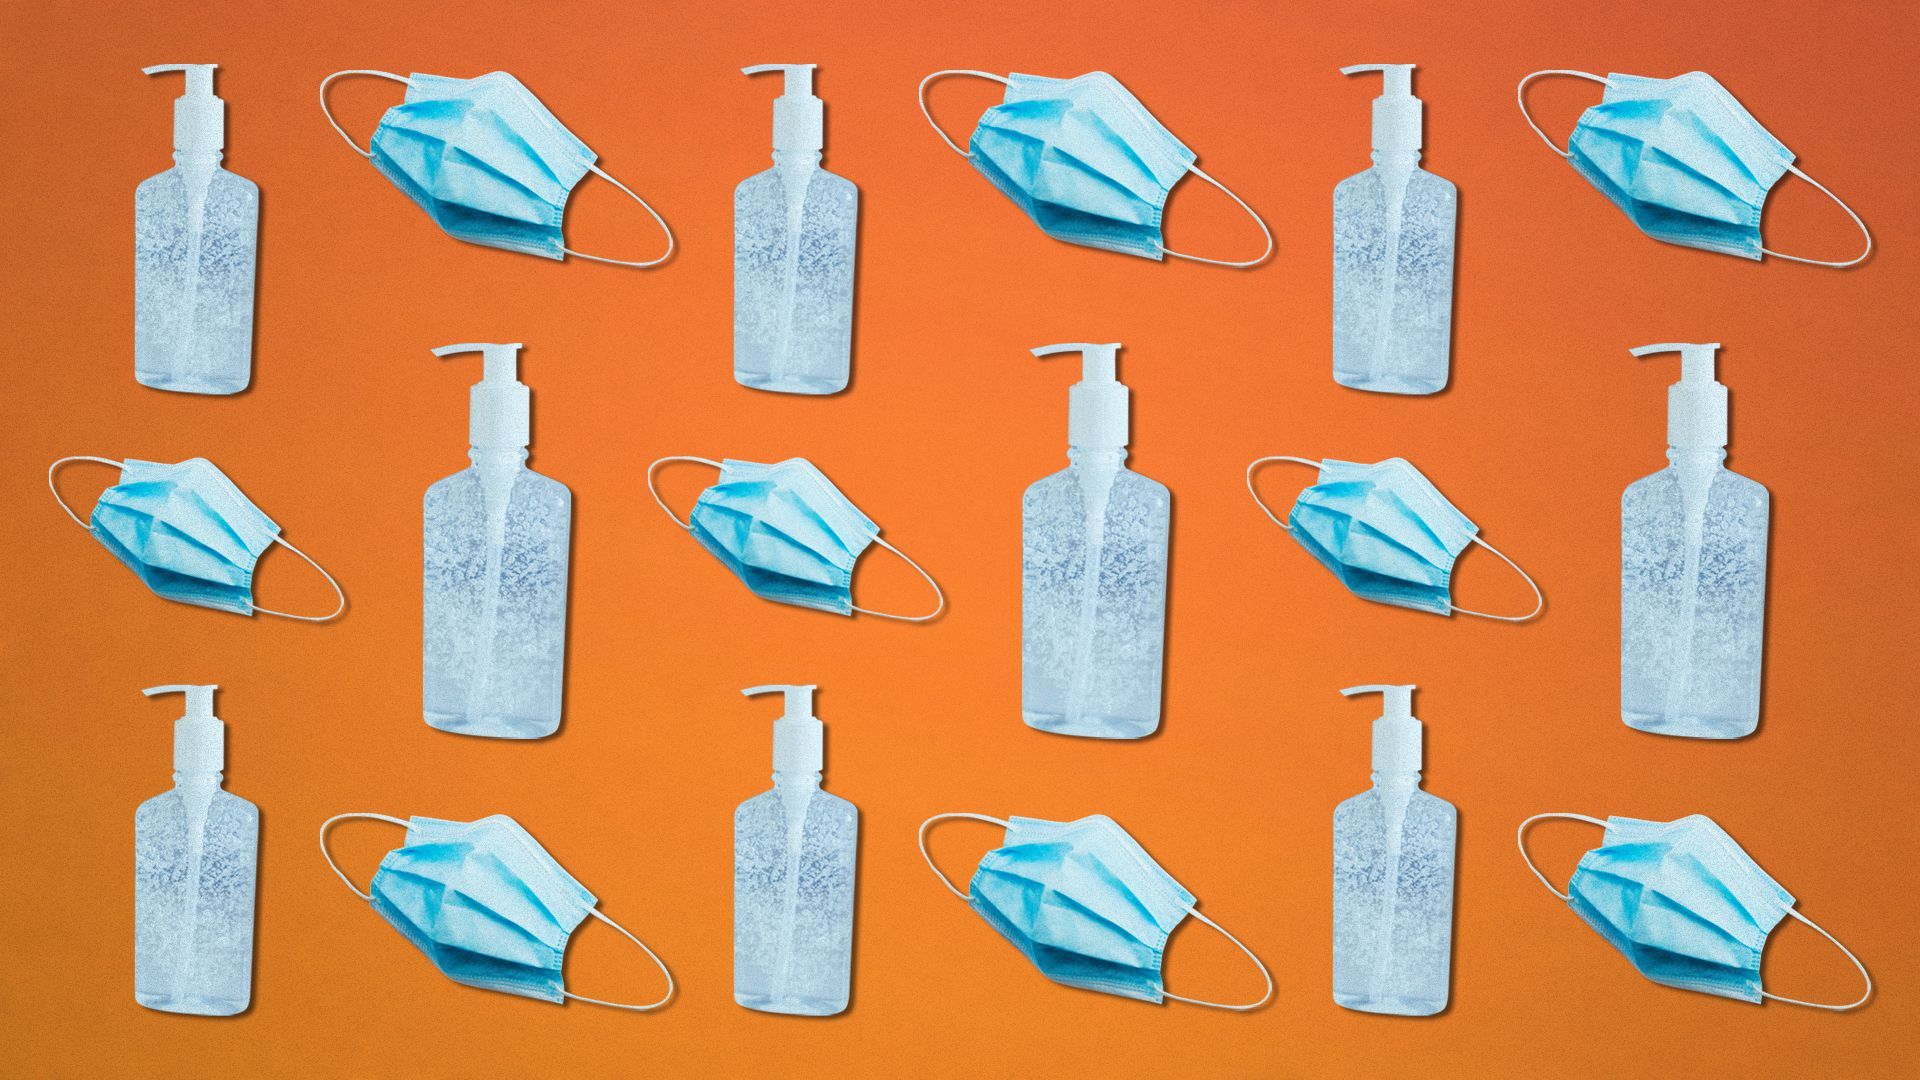 Illustration of a repeating pattern of hand sanitizer bottles and masks.